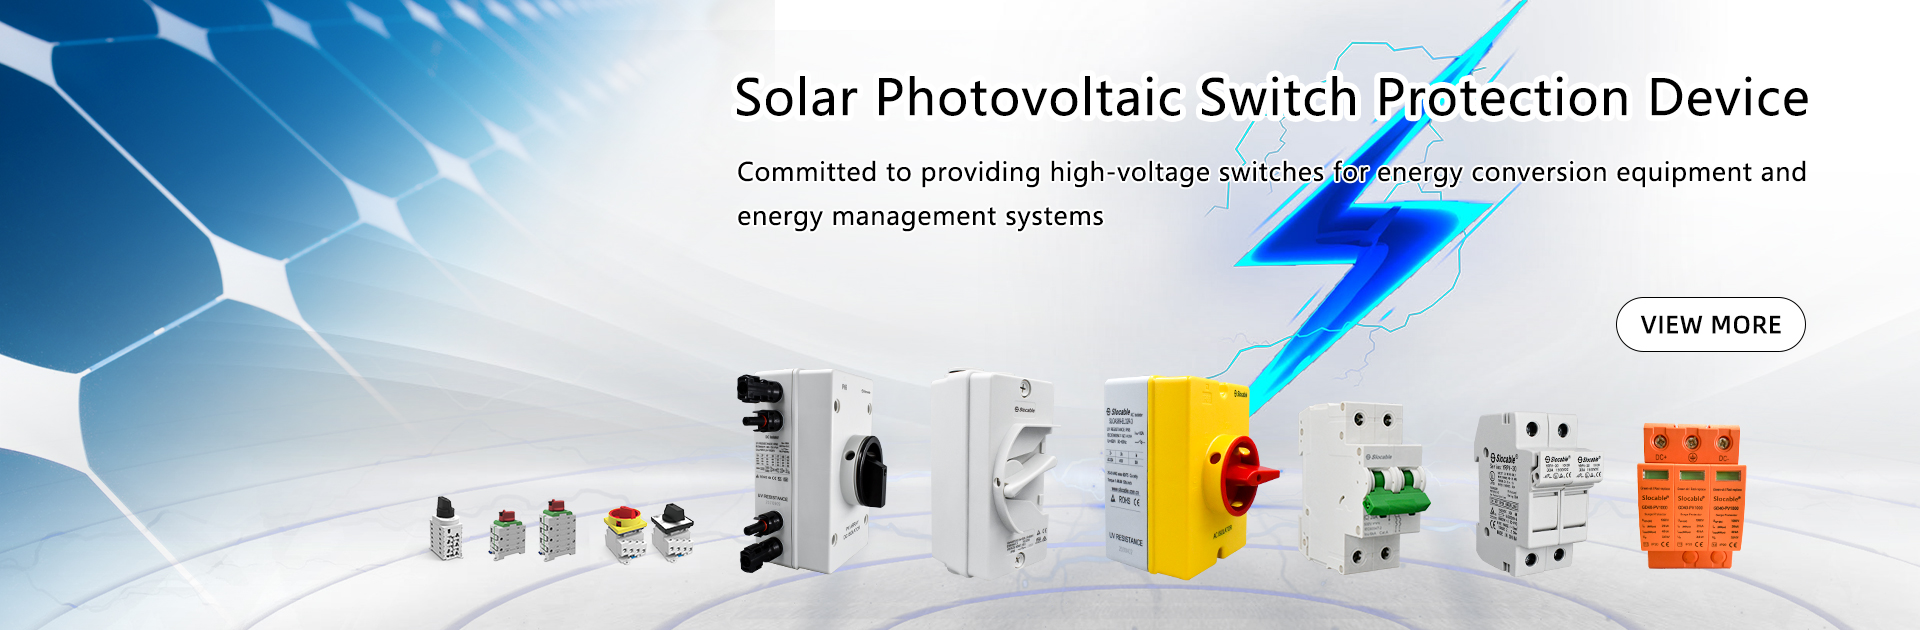 i-slocable dc solar switch banner